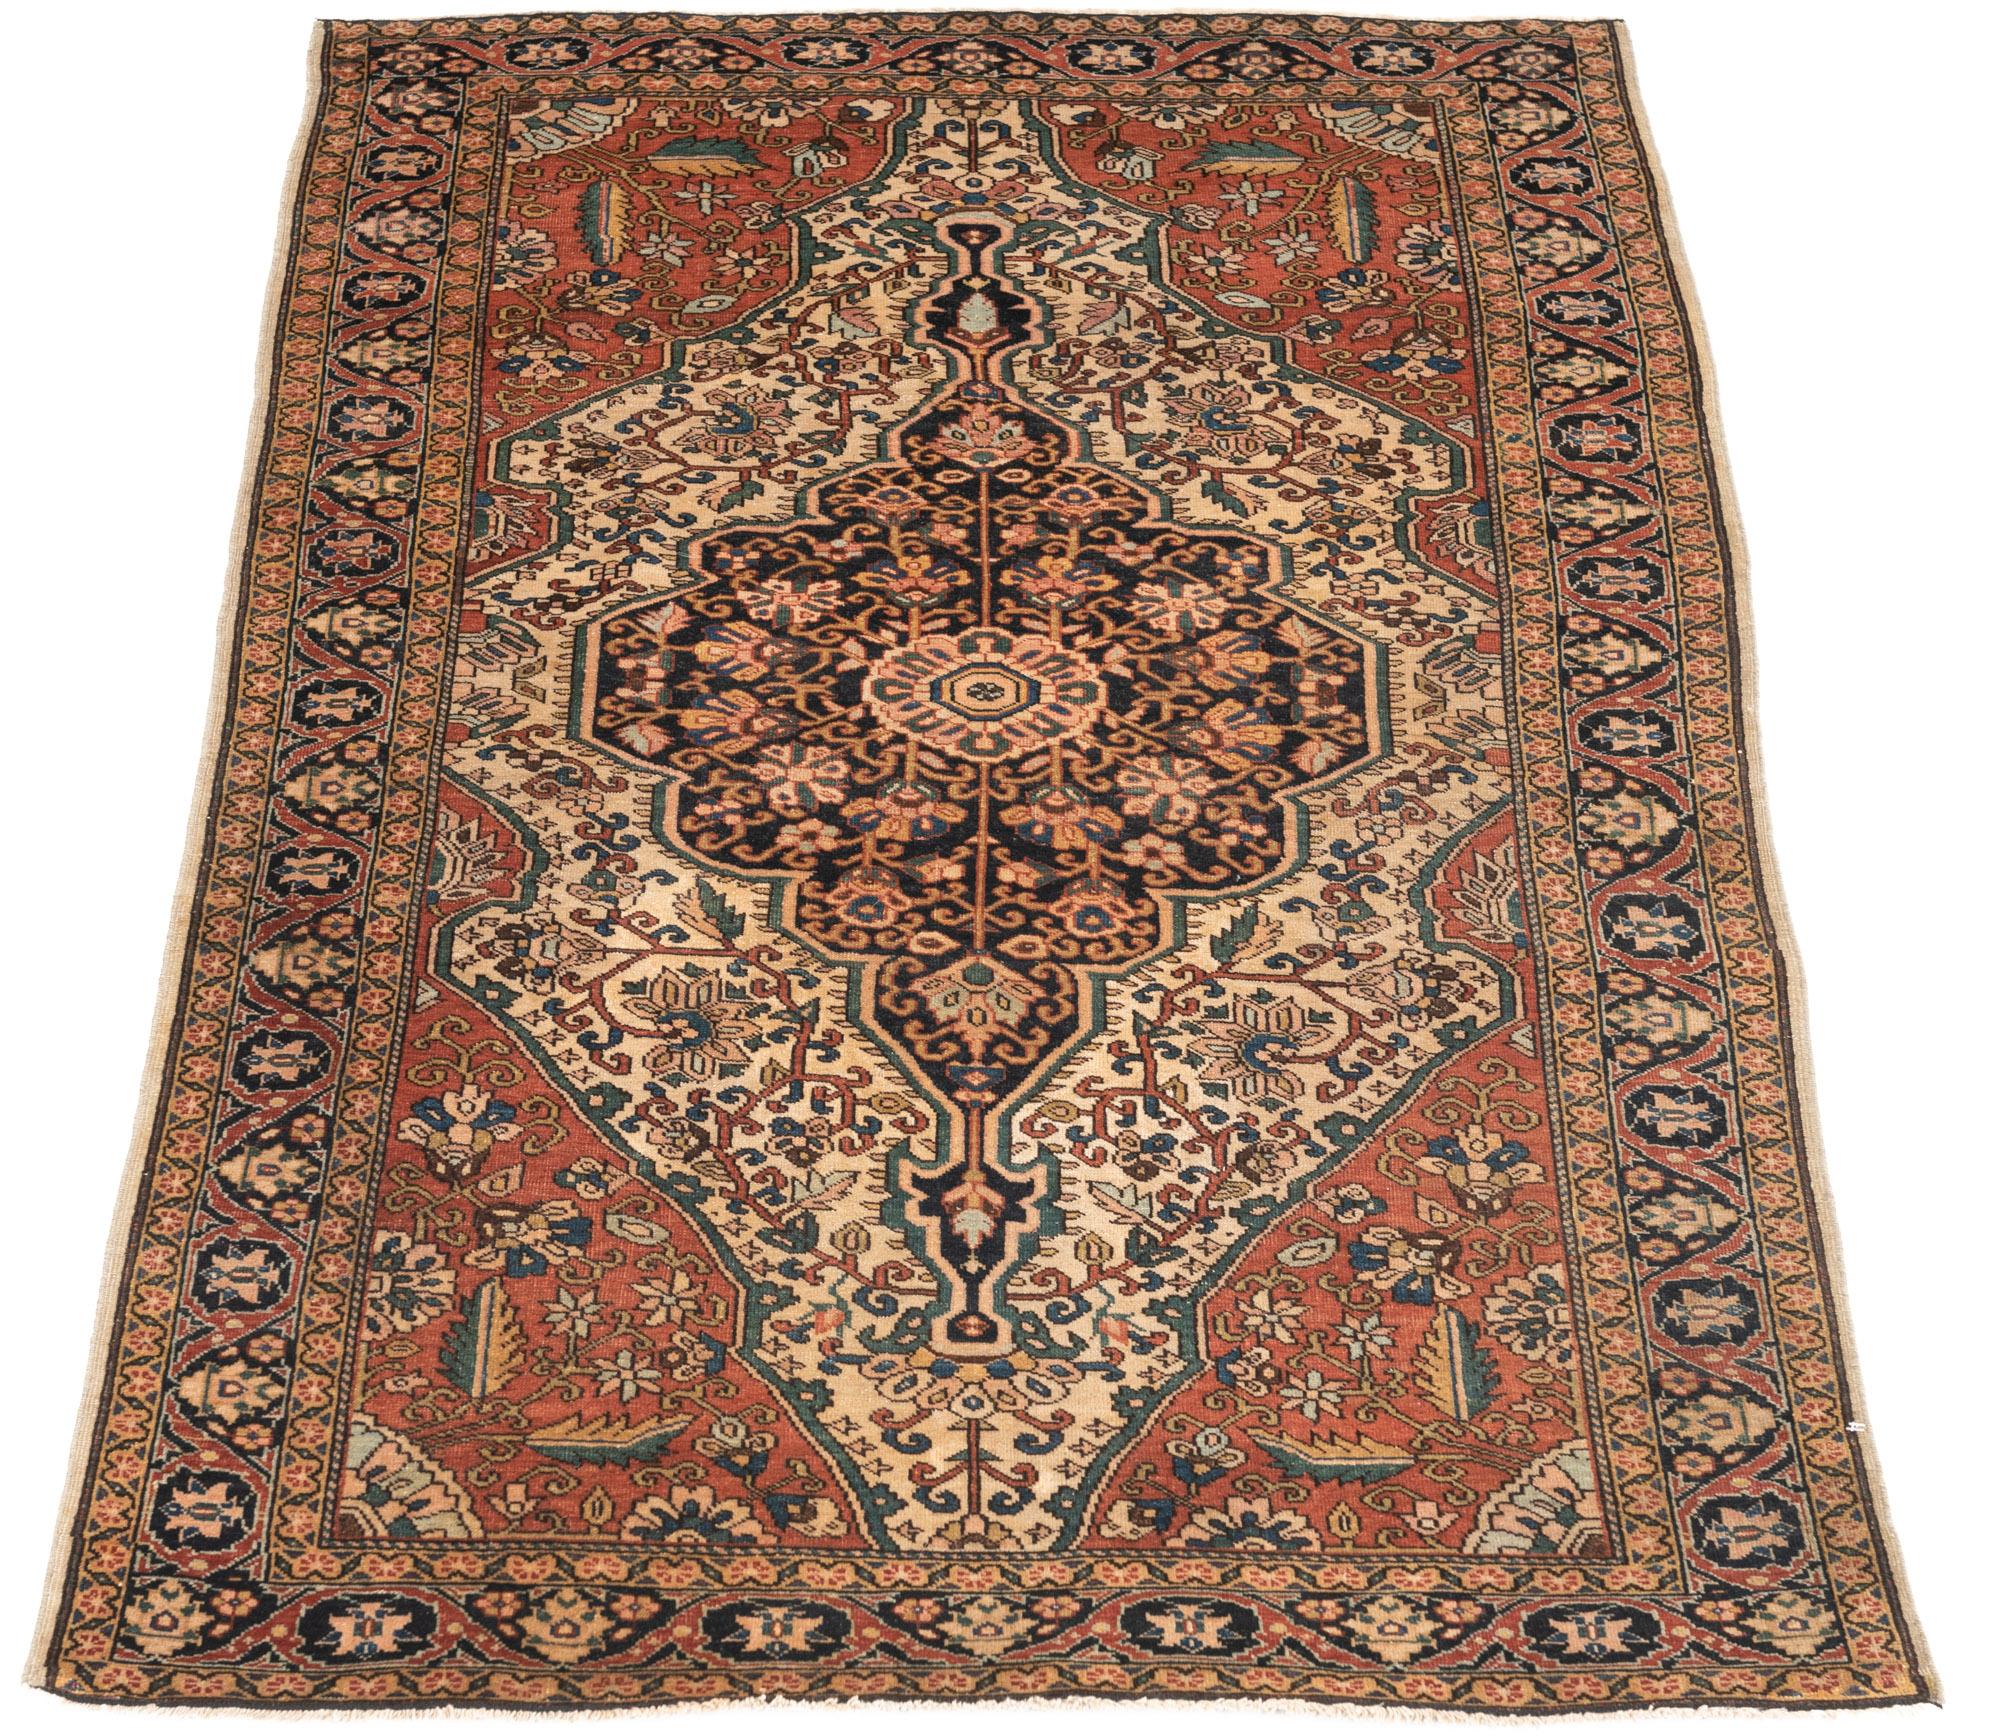 This antique Farahan has a central medallion design with a floral pattern. The finely hand knotted wool and natural dyes are of premier quality from the Farahan region in western Persia. Woven during an exceptional period for rugs of this type in